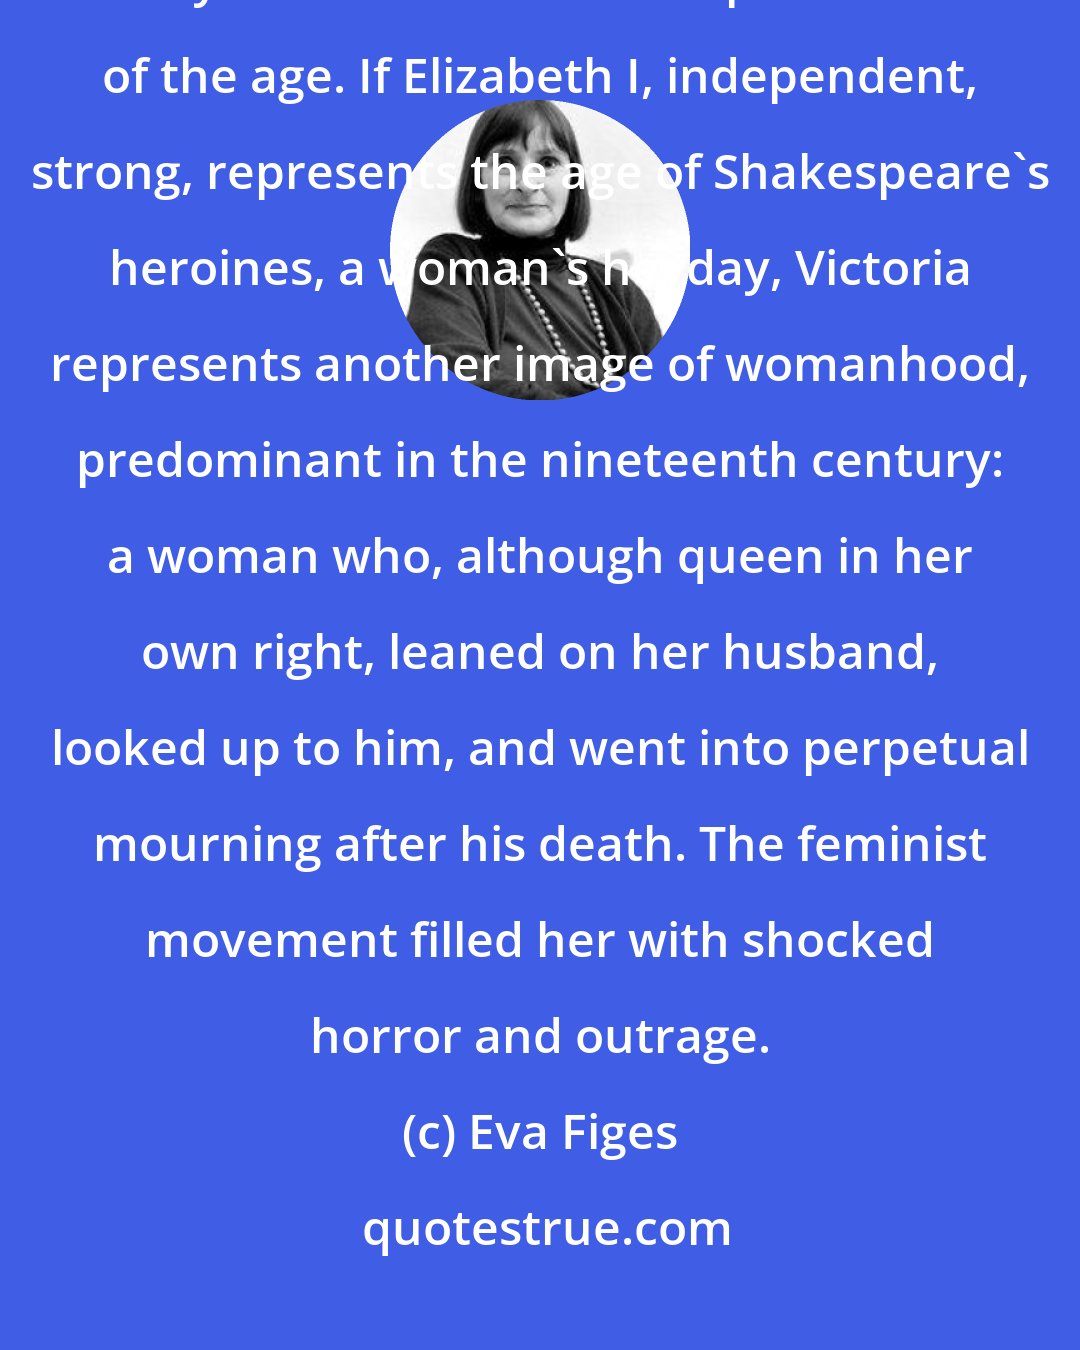 Eva Figes: Monarchs not only fashion their age, but are fashioned by it, so that they can become a sort of personification of the age. If Elizabeth I, independent, strong, represents the age of Shakespeare's heroines, a woman's heyday, Victoria represents another image of womanhood, predominant in the nineteenth century: a woman who, although queen in her own right, leaned on her husband, looked up to him, and went into perpetual mourning after his death. The feminist movement filled her with shocked horror and outrage.